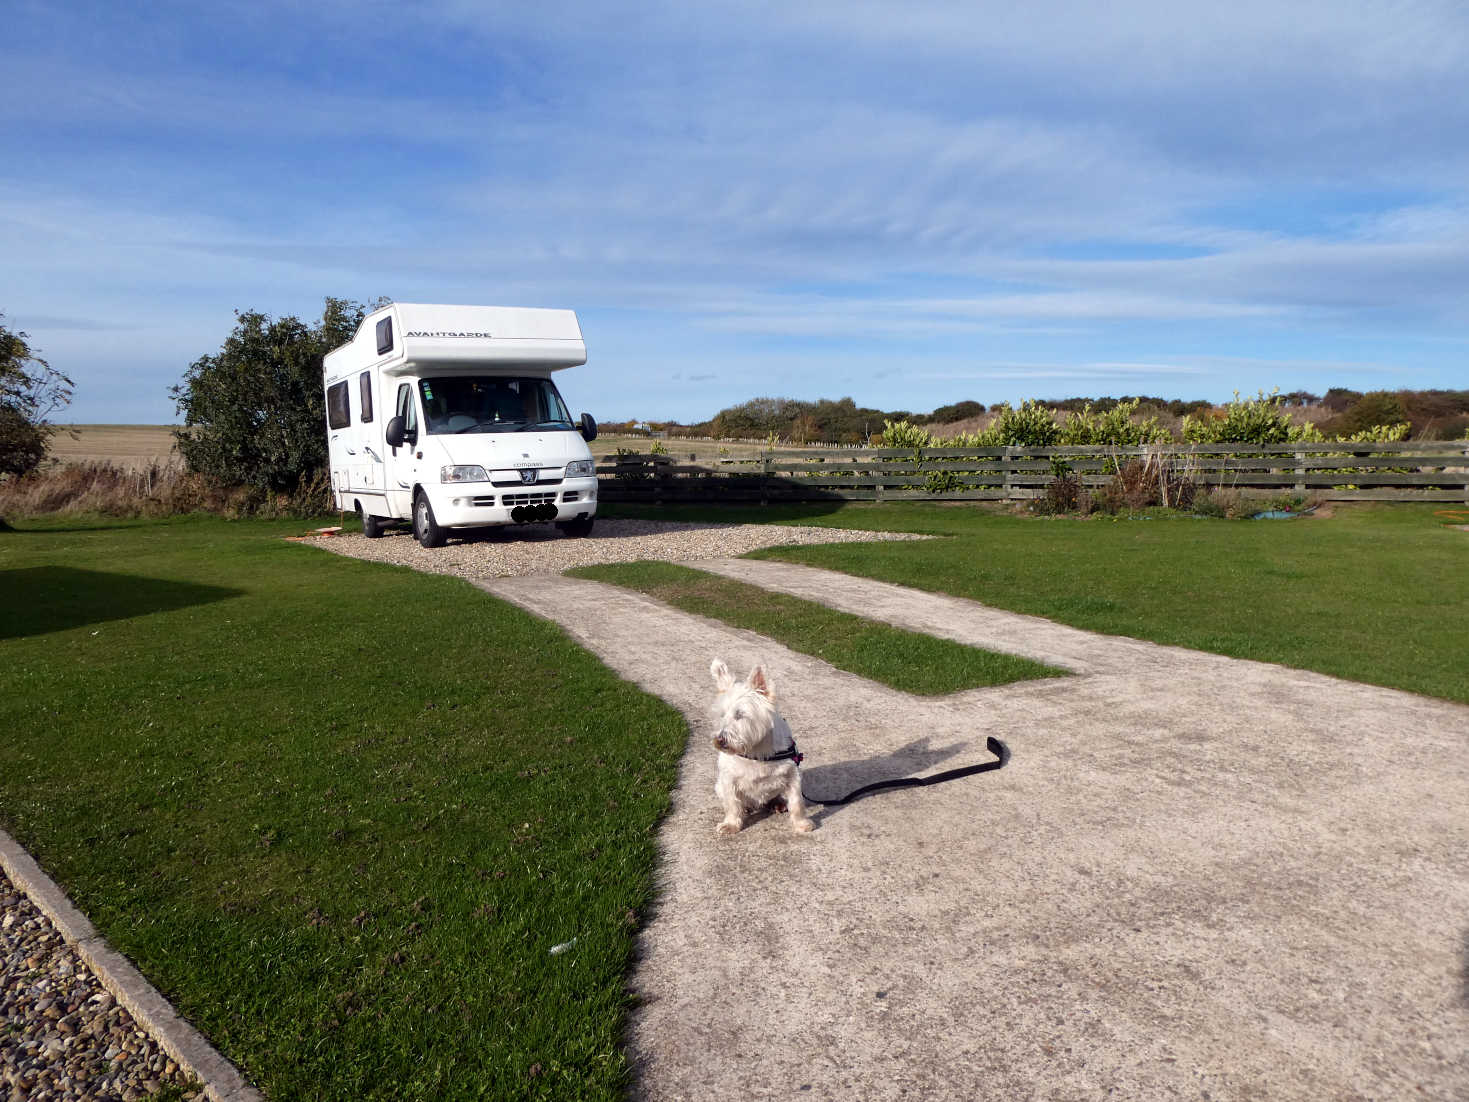 poppy the westie and Betsy at Cayton bay camp site